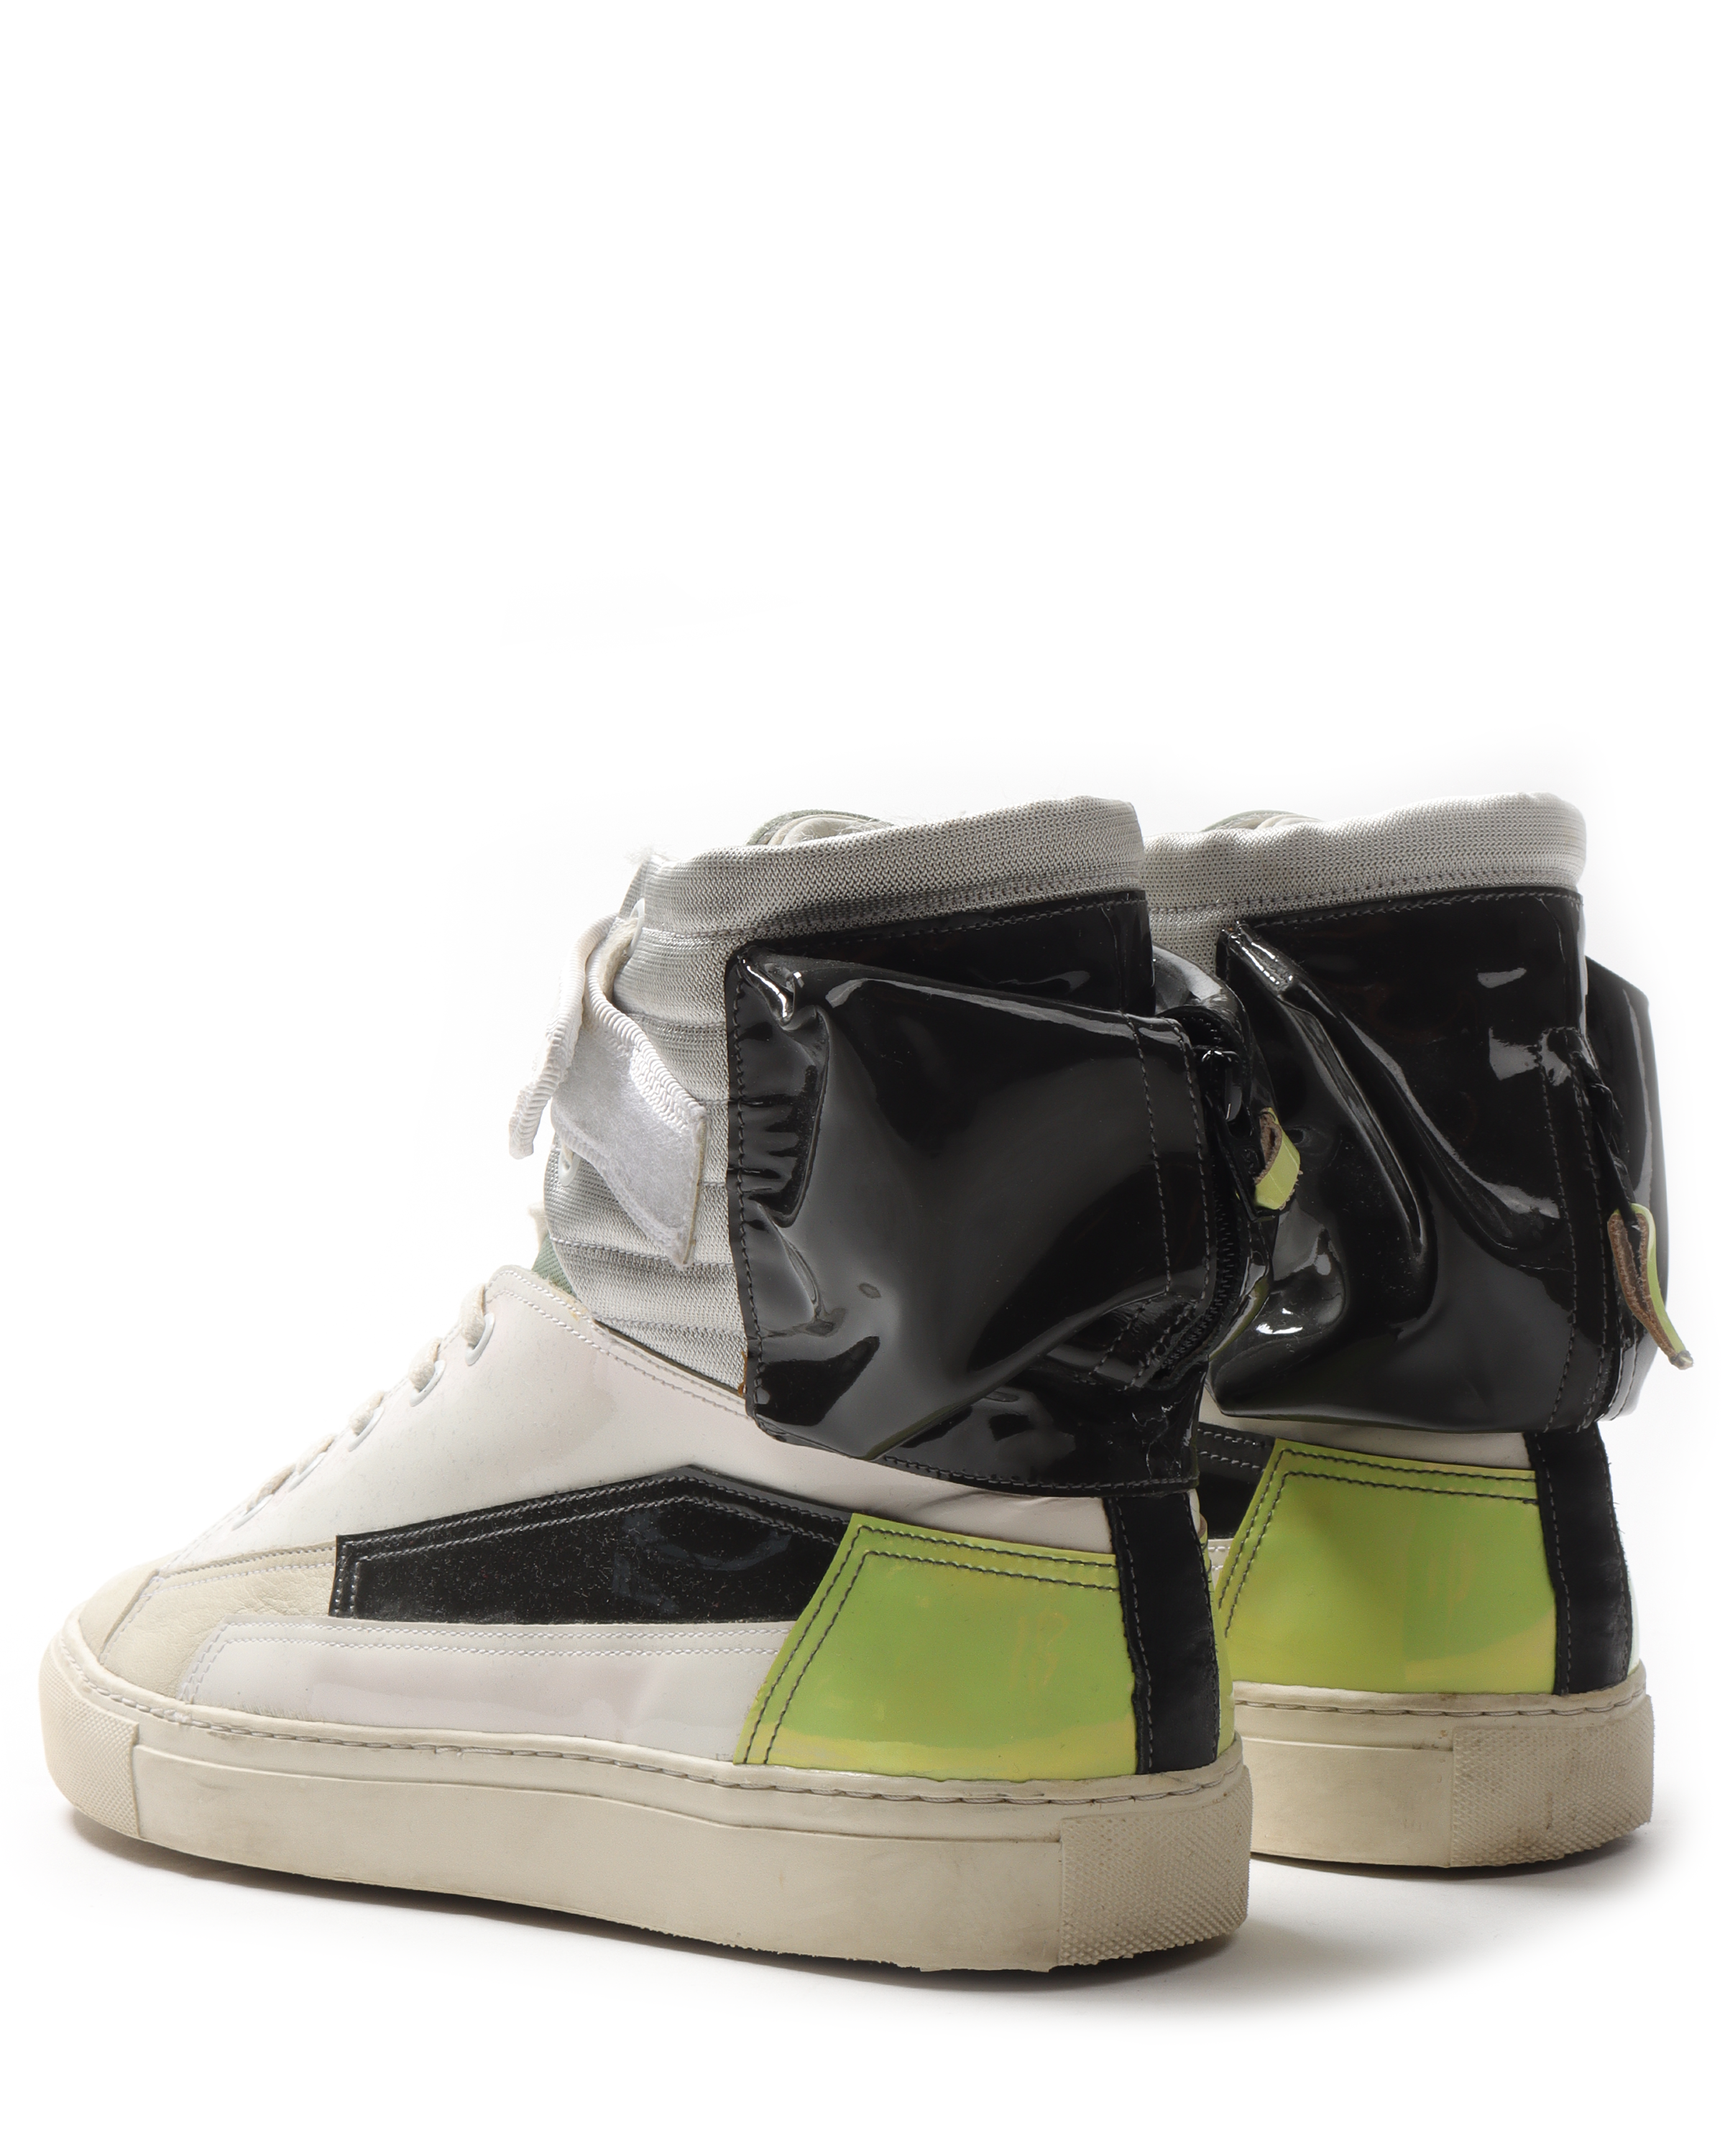 SS10 Astronaut Sneakers